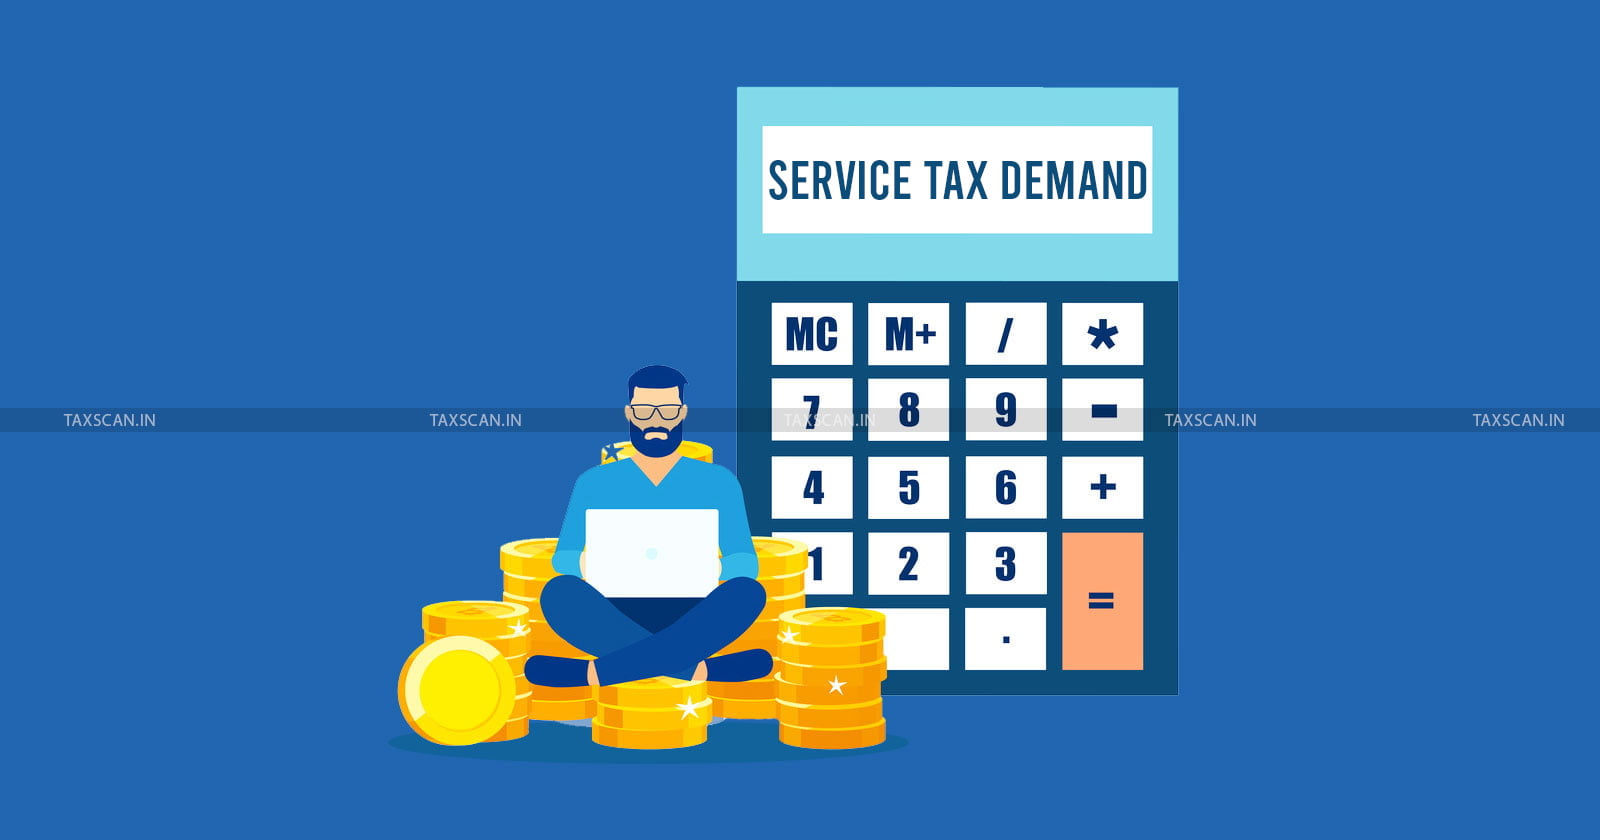 Existence of Alternate Remedy - Madras High Court Refuses to Entertain Writ - Madras High Court - Writ against Service Tax Demand - Writ - Service Tax Demand - Service Tax - Taxscan